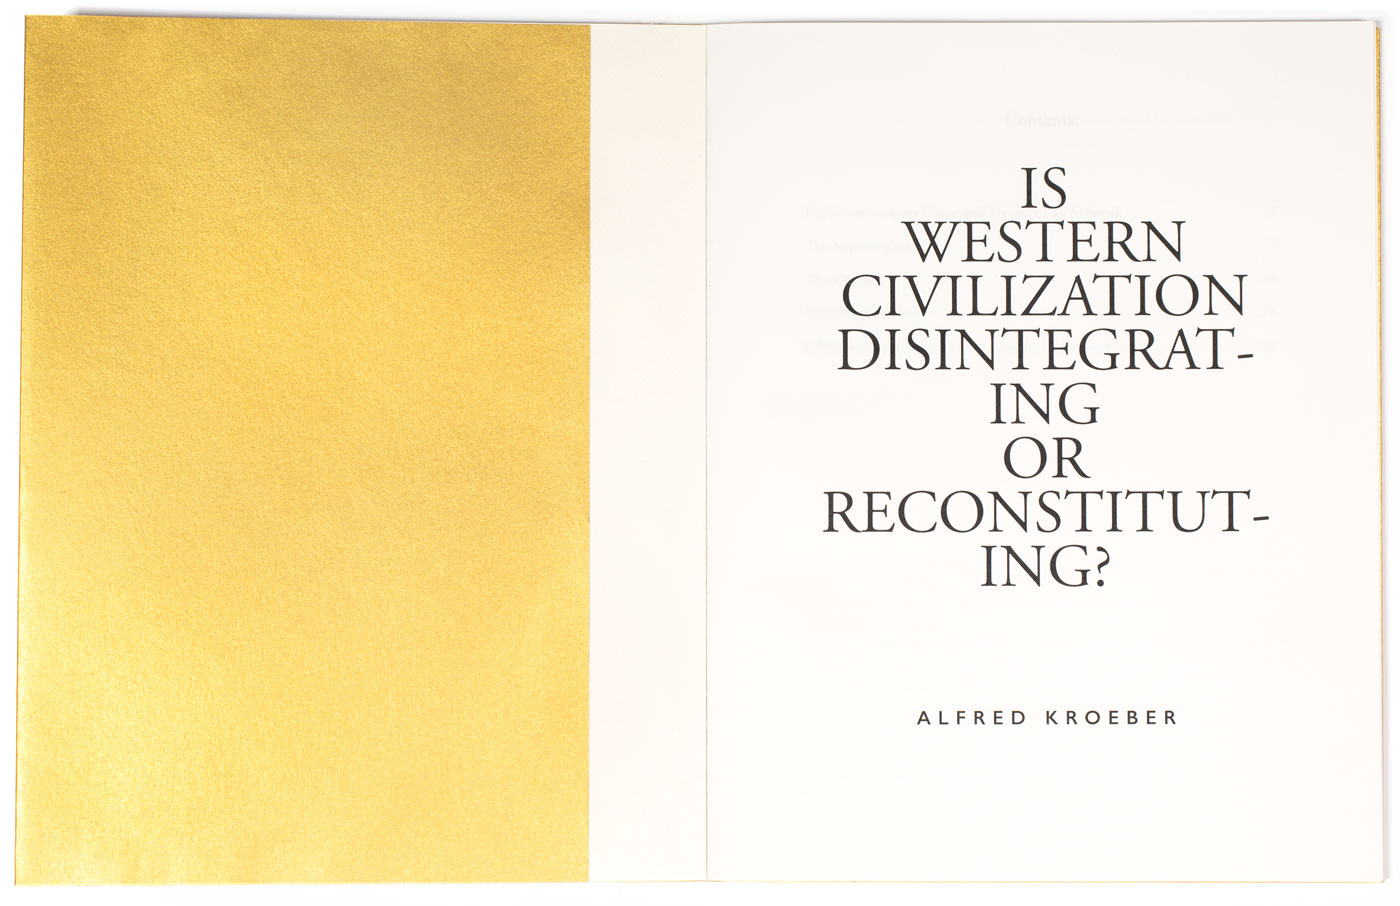 The frontispiece of the book 'Is Western Civilization Disintegrating or Reconstituting?'